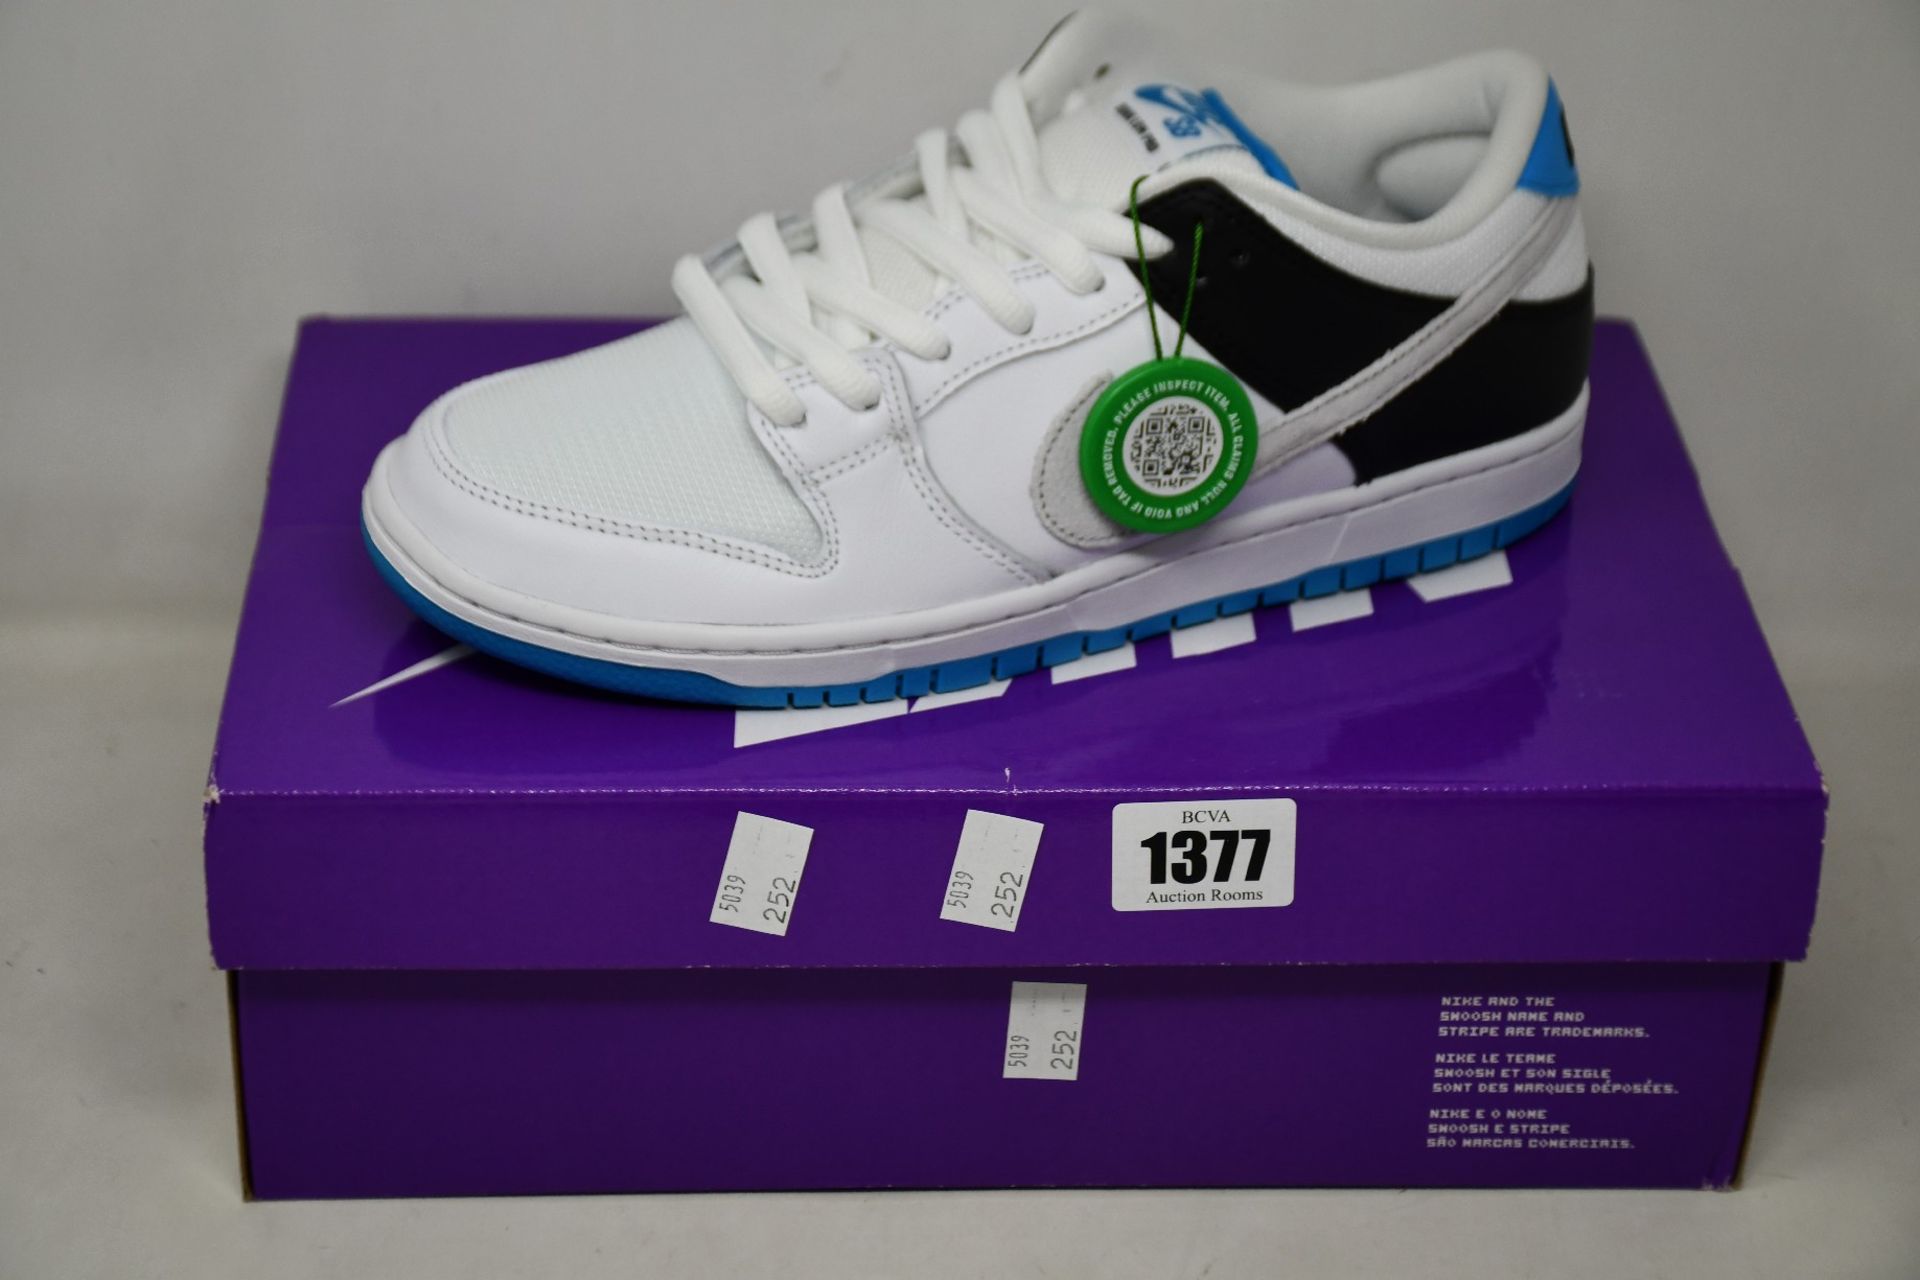 A pair of as new Nike SB Dunk Low Laser Blue with authentication tag (UK 7).